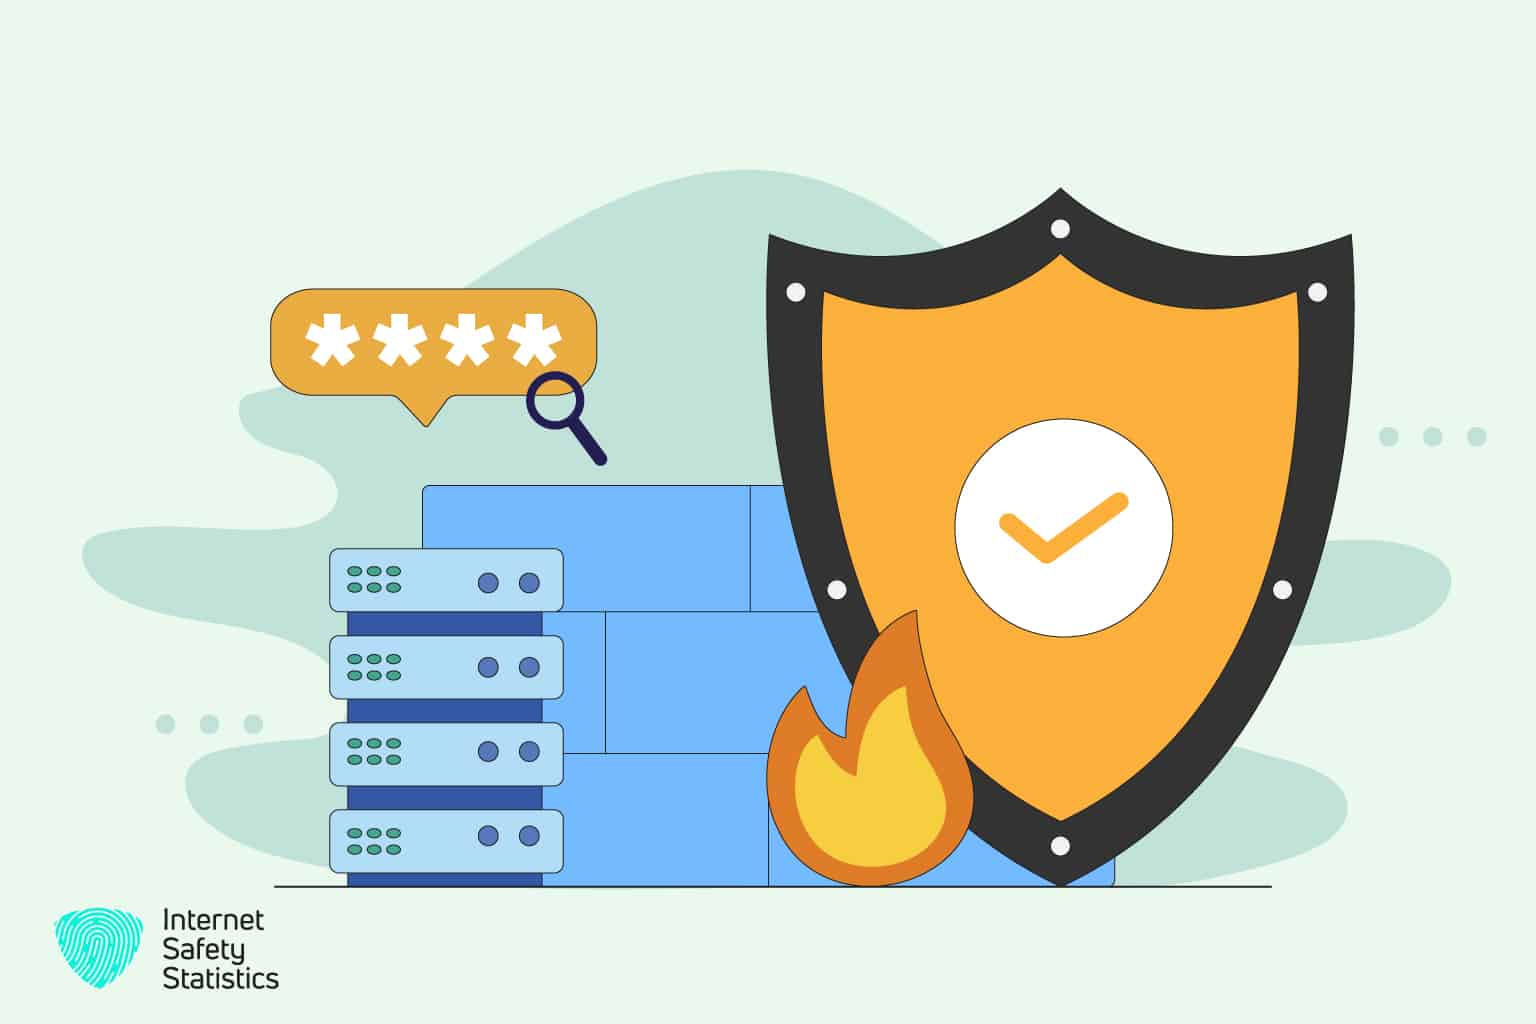 Avast Firewall: How to Allow Programmes Through the Avast Firewall In 5 Simple Steps